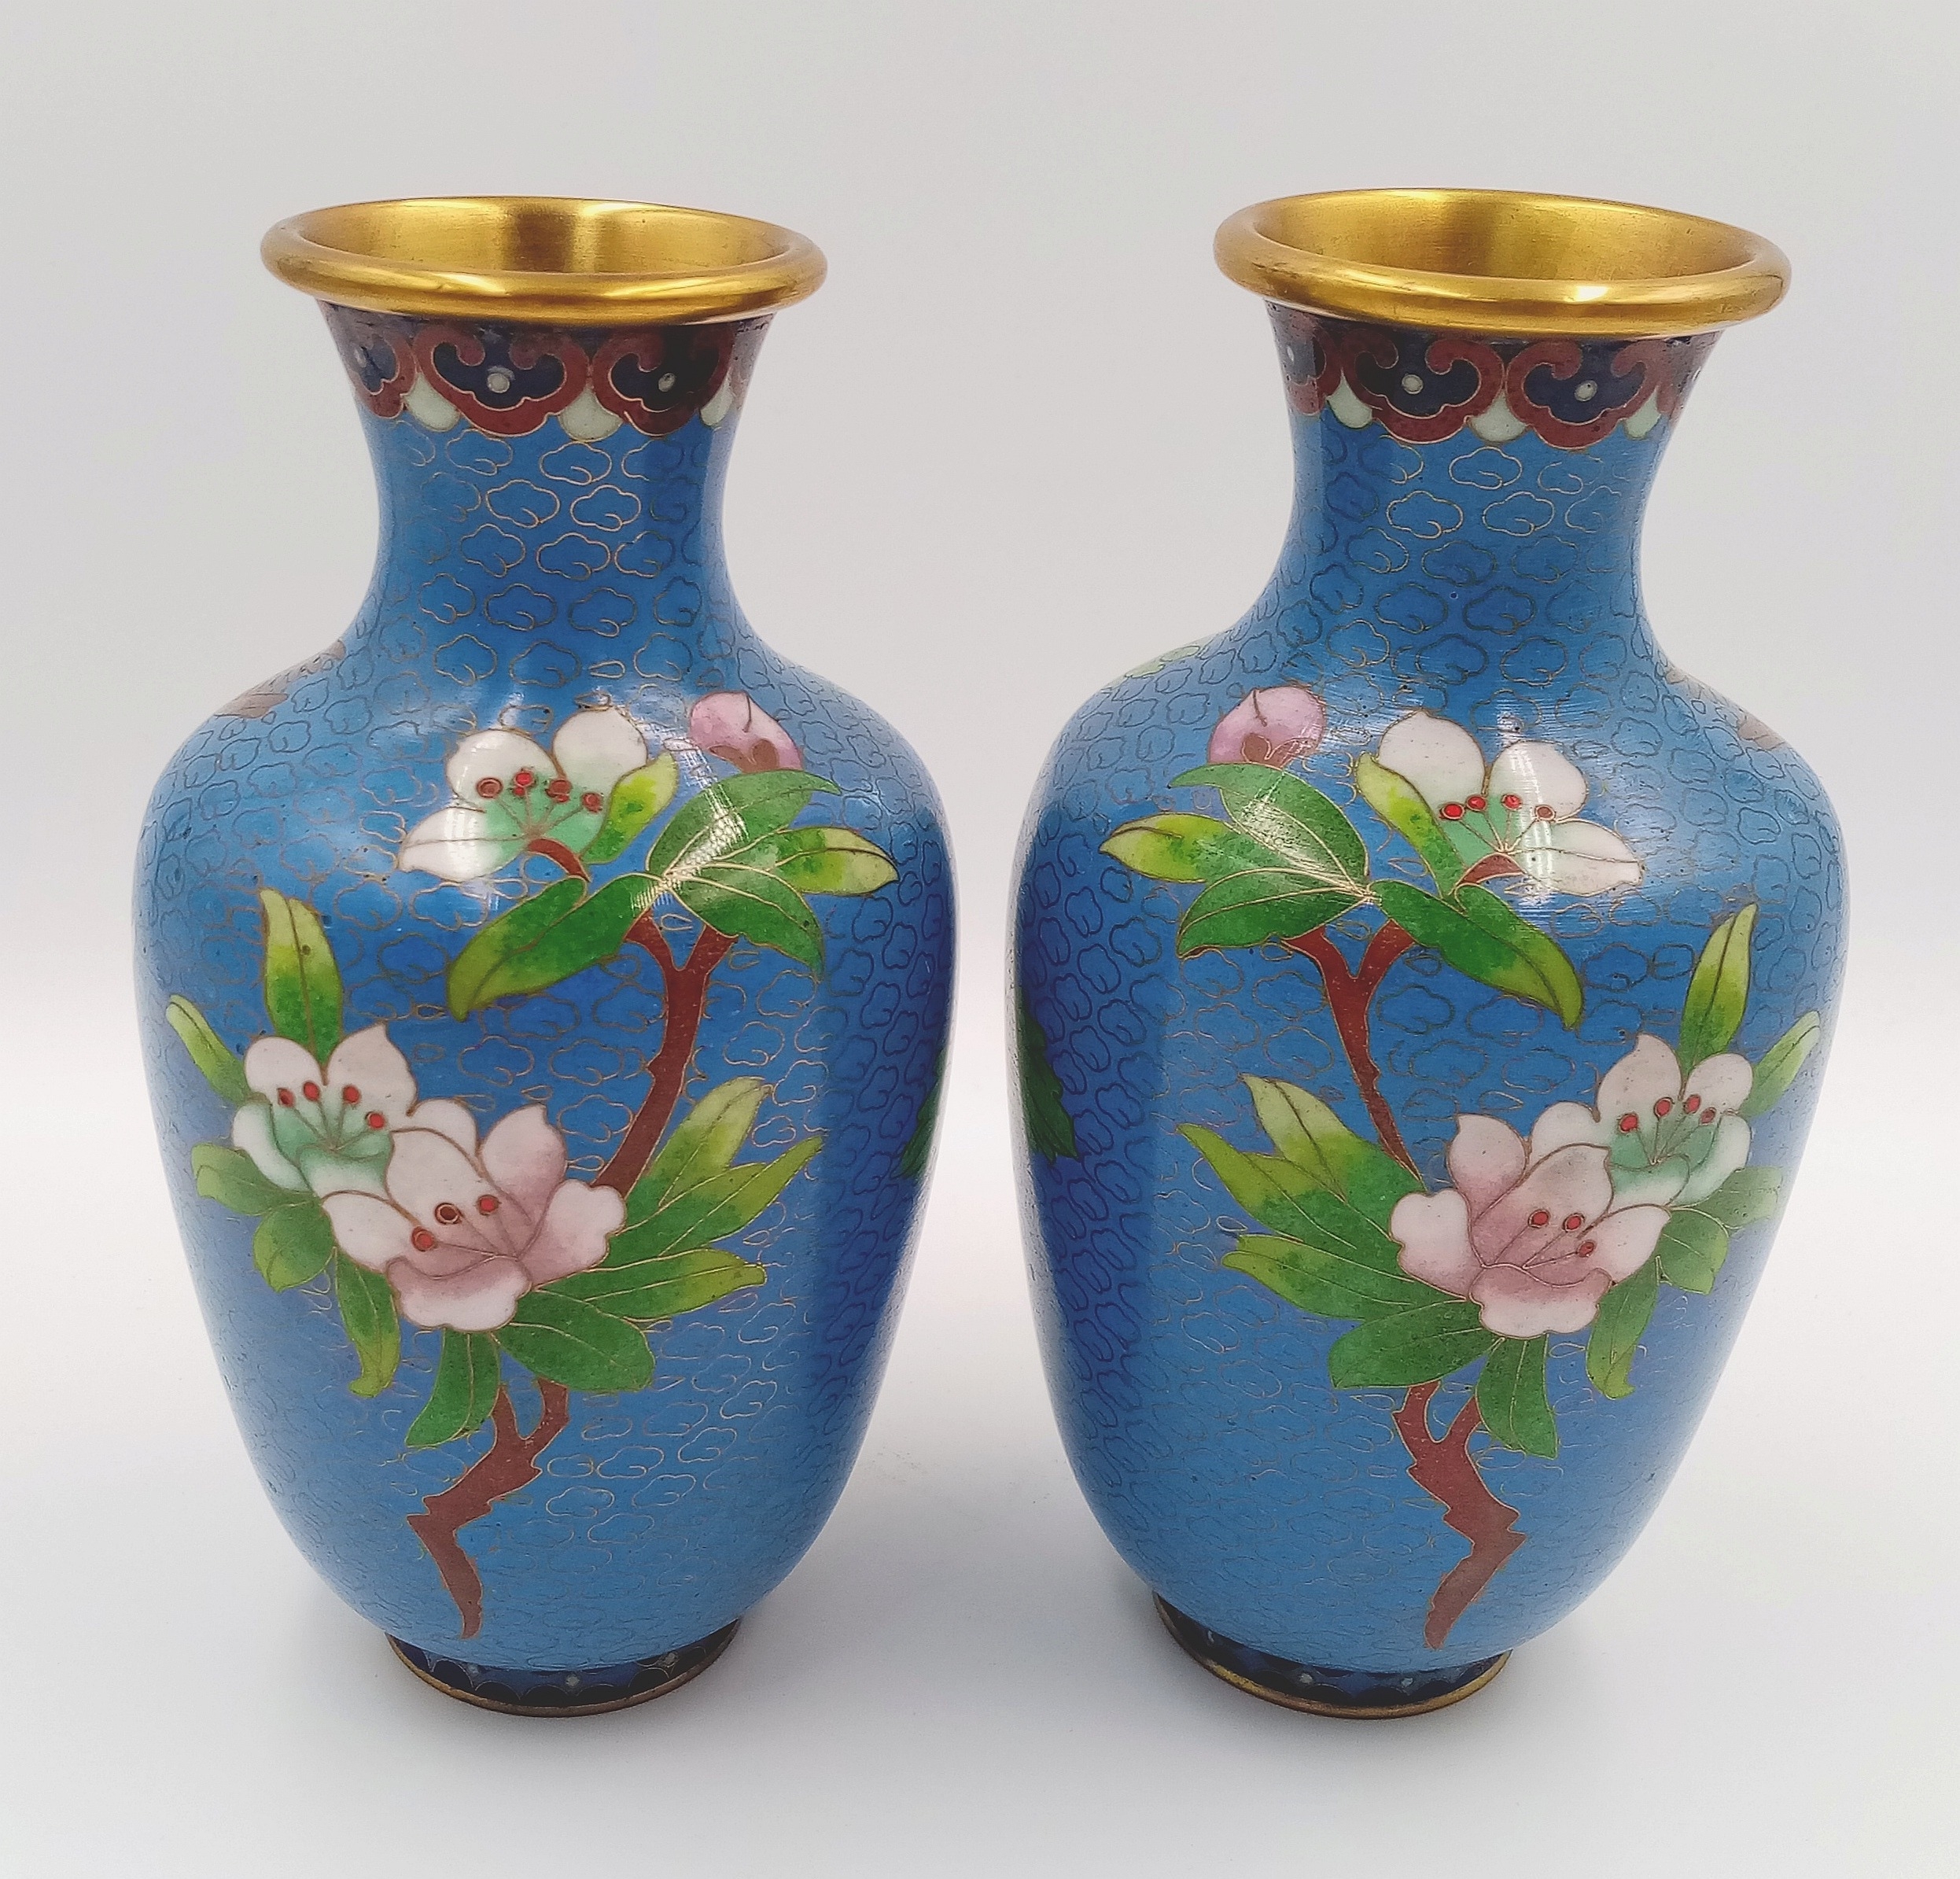 A Pair of Vintage Chinese Cloisonné Sky Blue Decorative Vases. 16cm tall. In fitted case. - Image 2 of 5